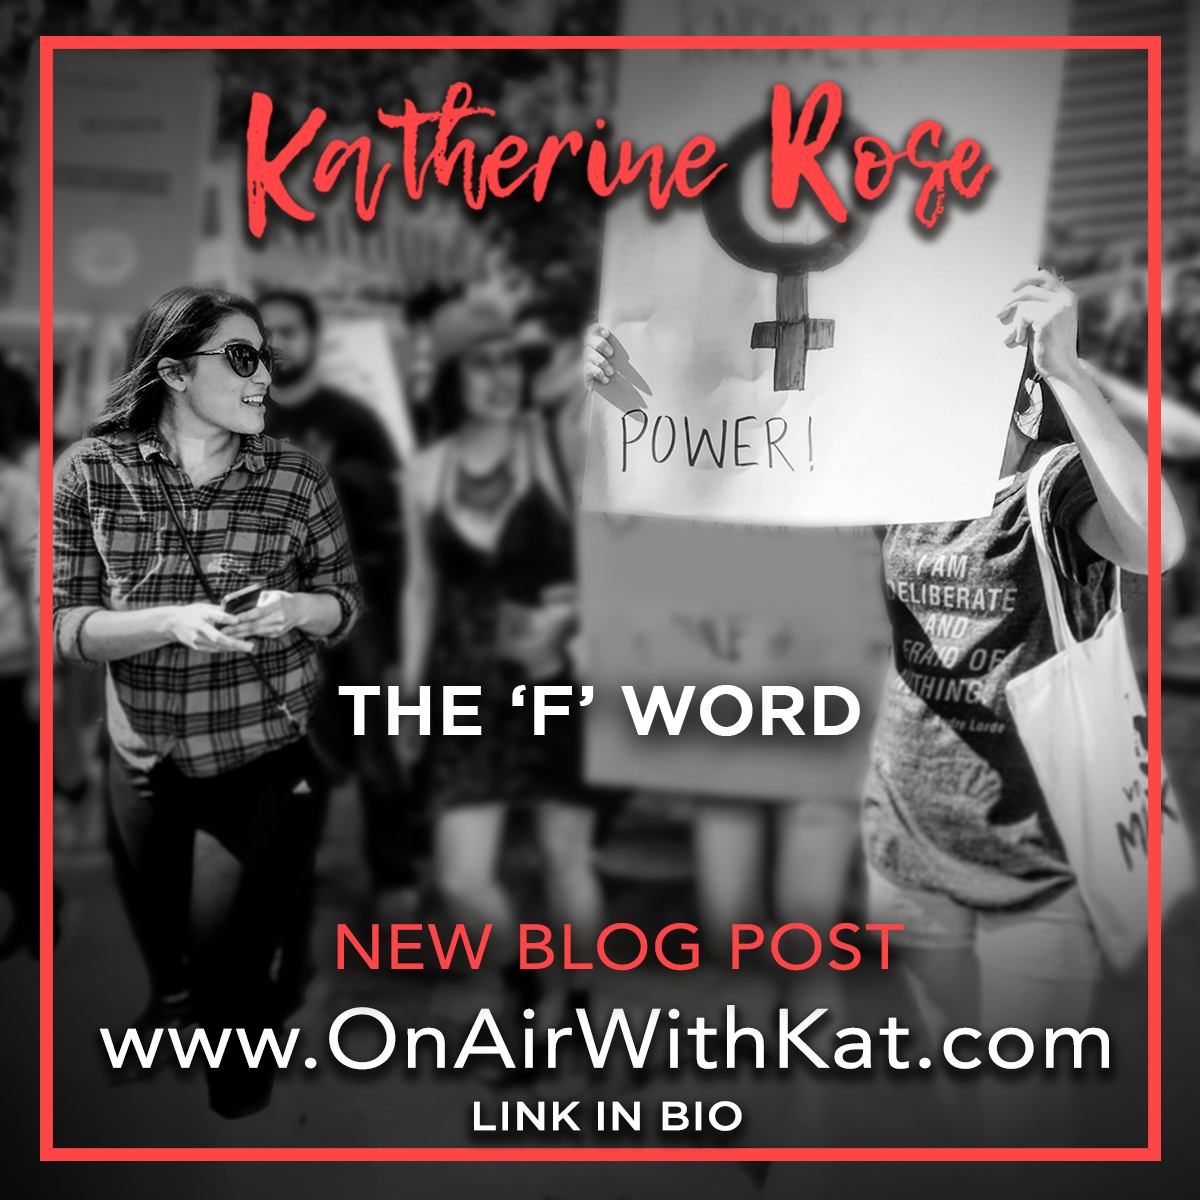 The ‘F’ word